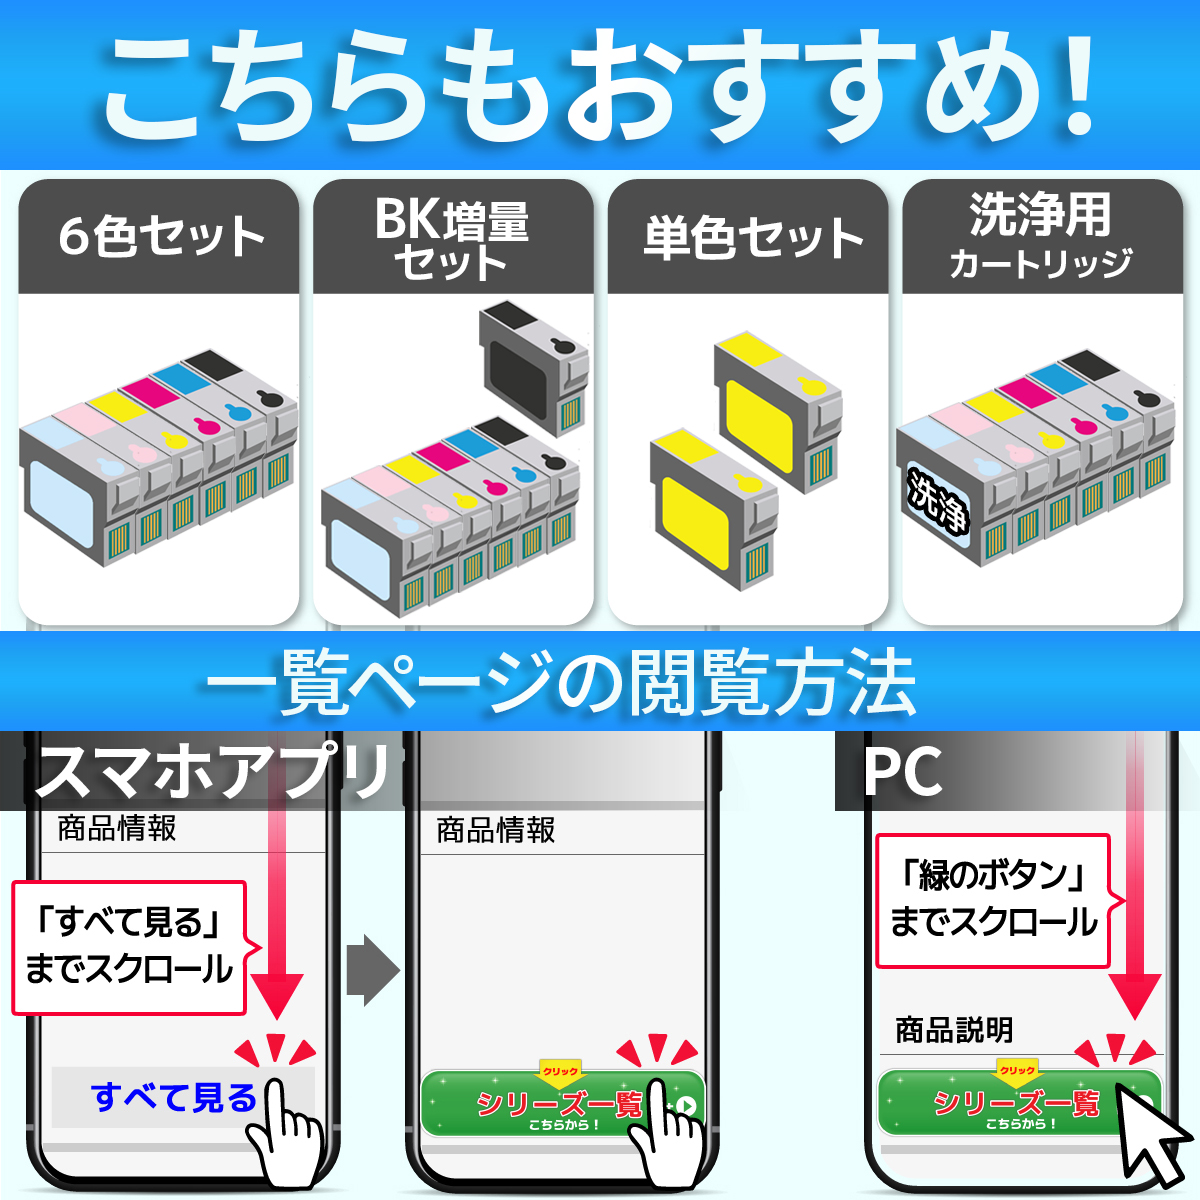 SAT-6CL SAT サツマイモ 互換 インク ブラック ４個 EPSON エプソン EP-712A EP-713A EP-714A EP-715A EP-716A EP-812A EP-813A EP-814A EP-815A EP-816A｜baustore｜10